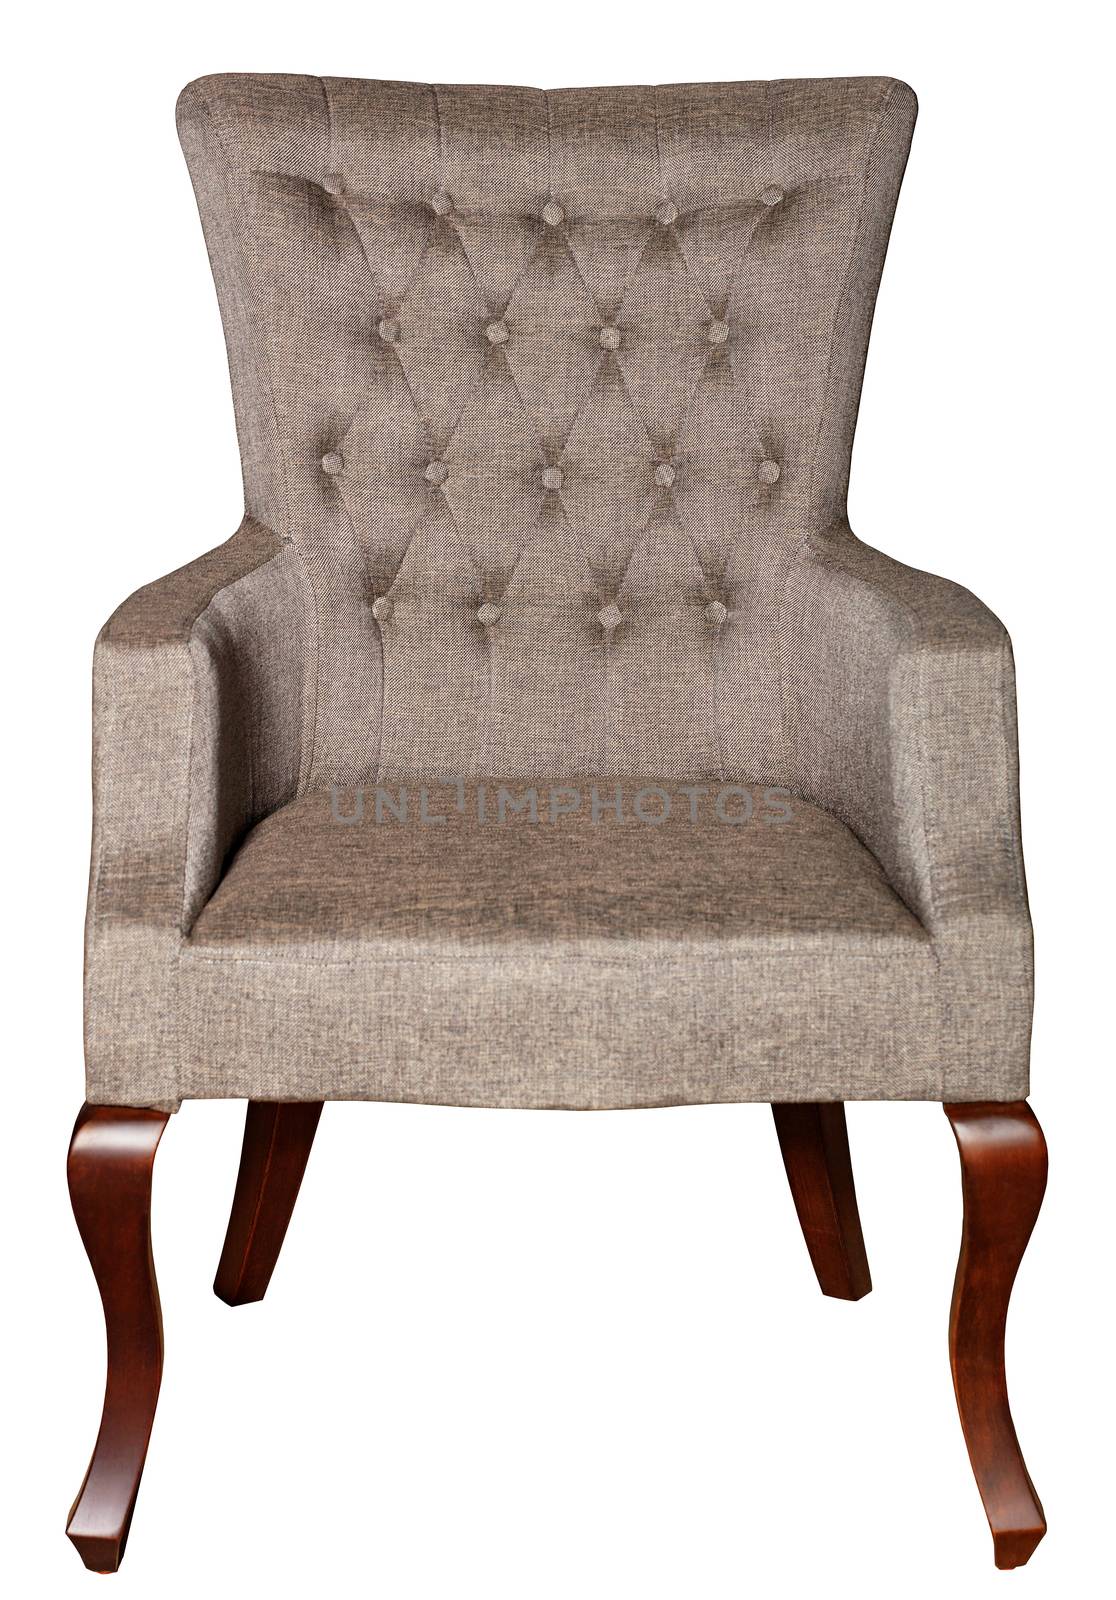 A wooden soft armchair upholstered in brown textile upholstery with bent curly legs, photographed frontally, isolated on a white background.